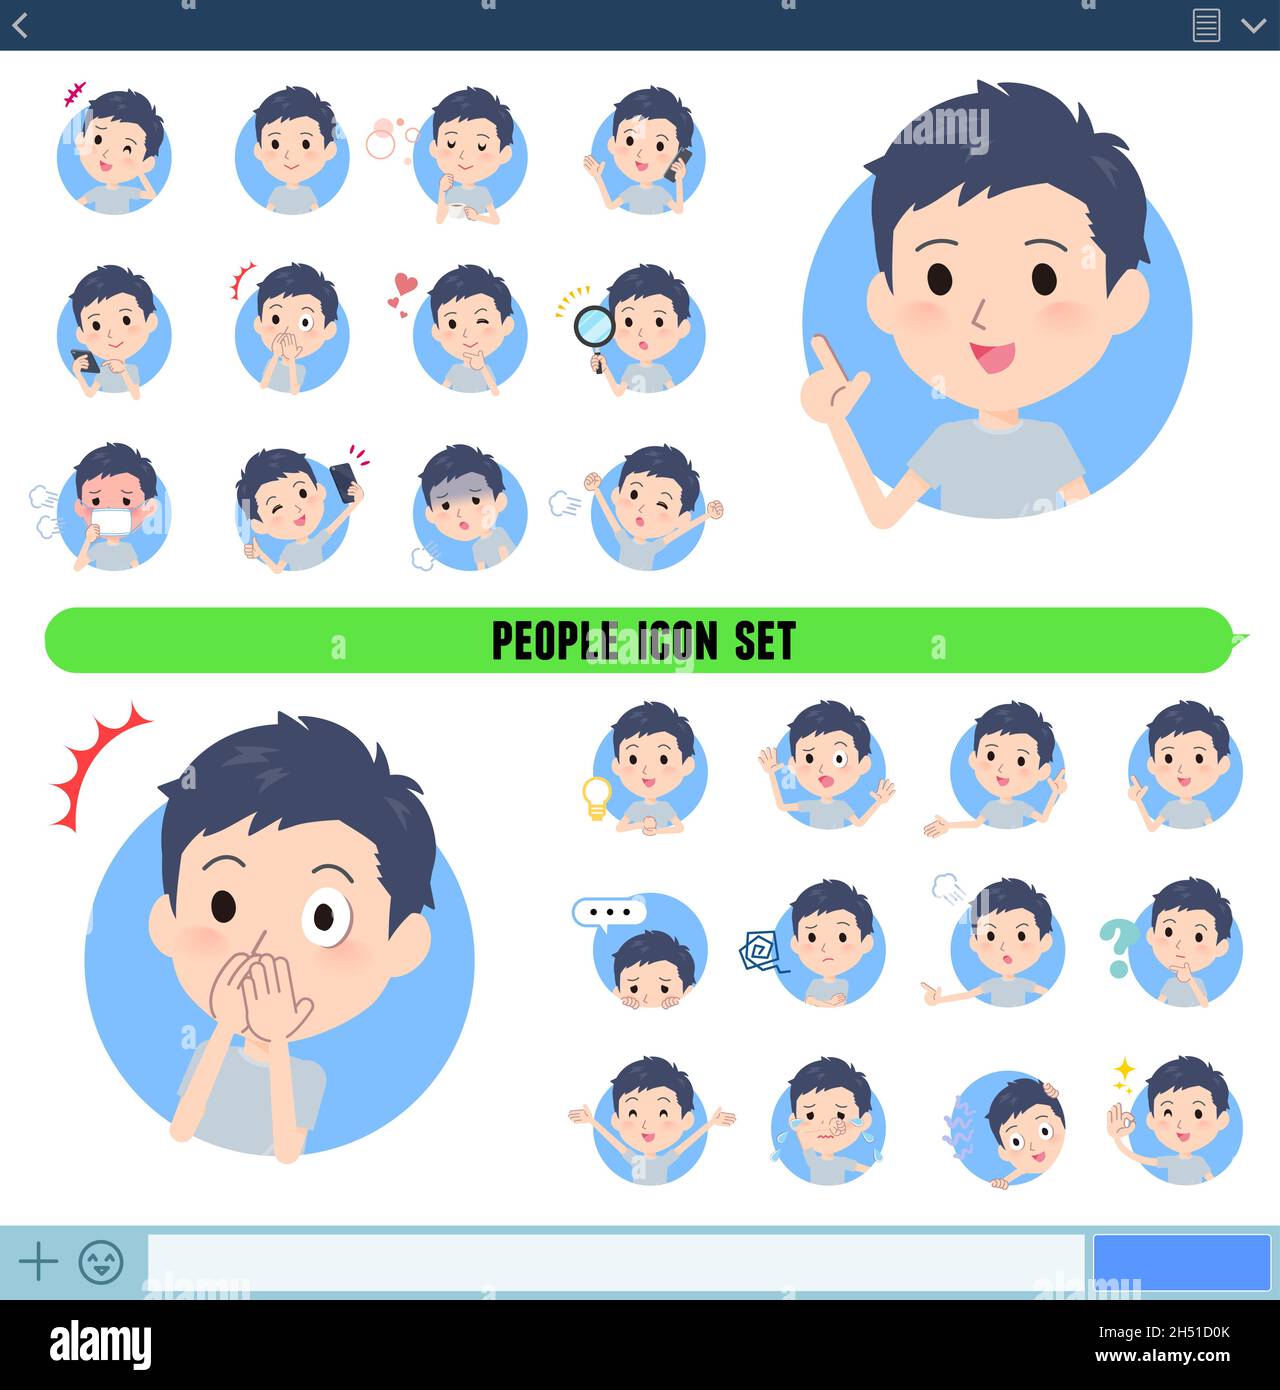 A set of unpaid avatar man with expresses various emotions In icon format.It's vector art so easy to edit. Stock Vector